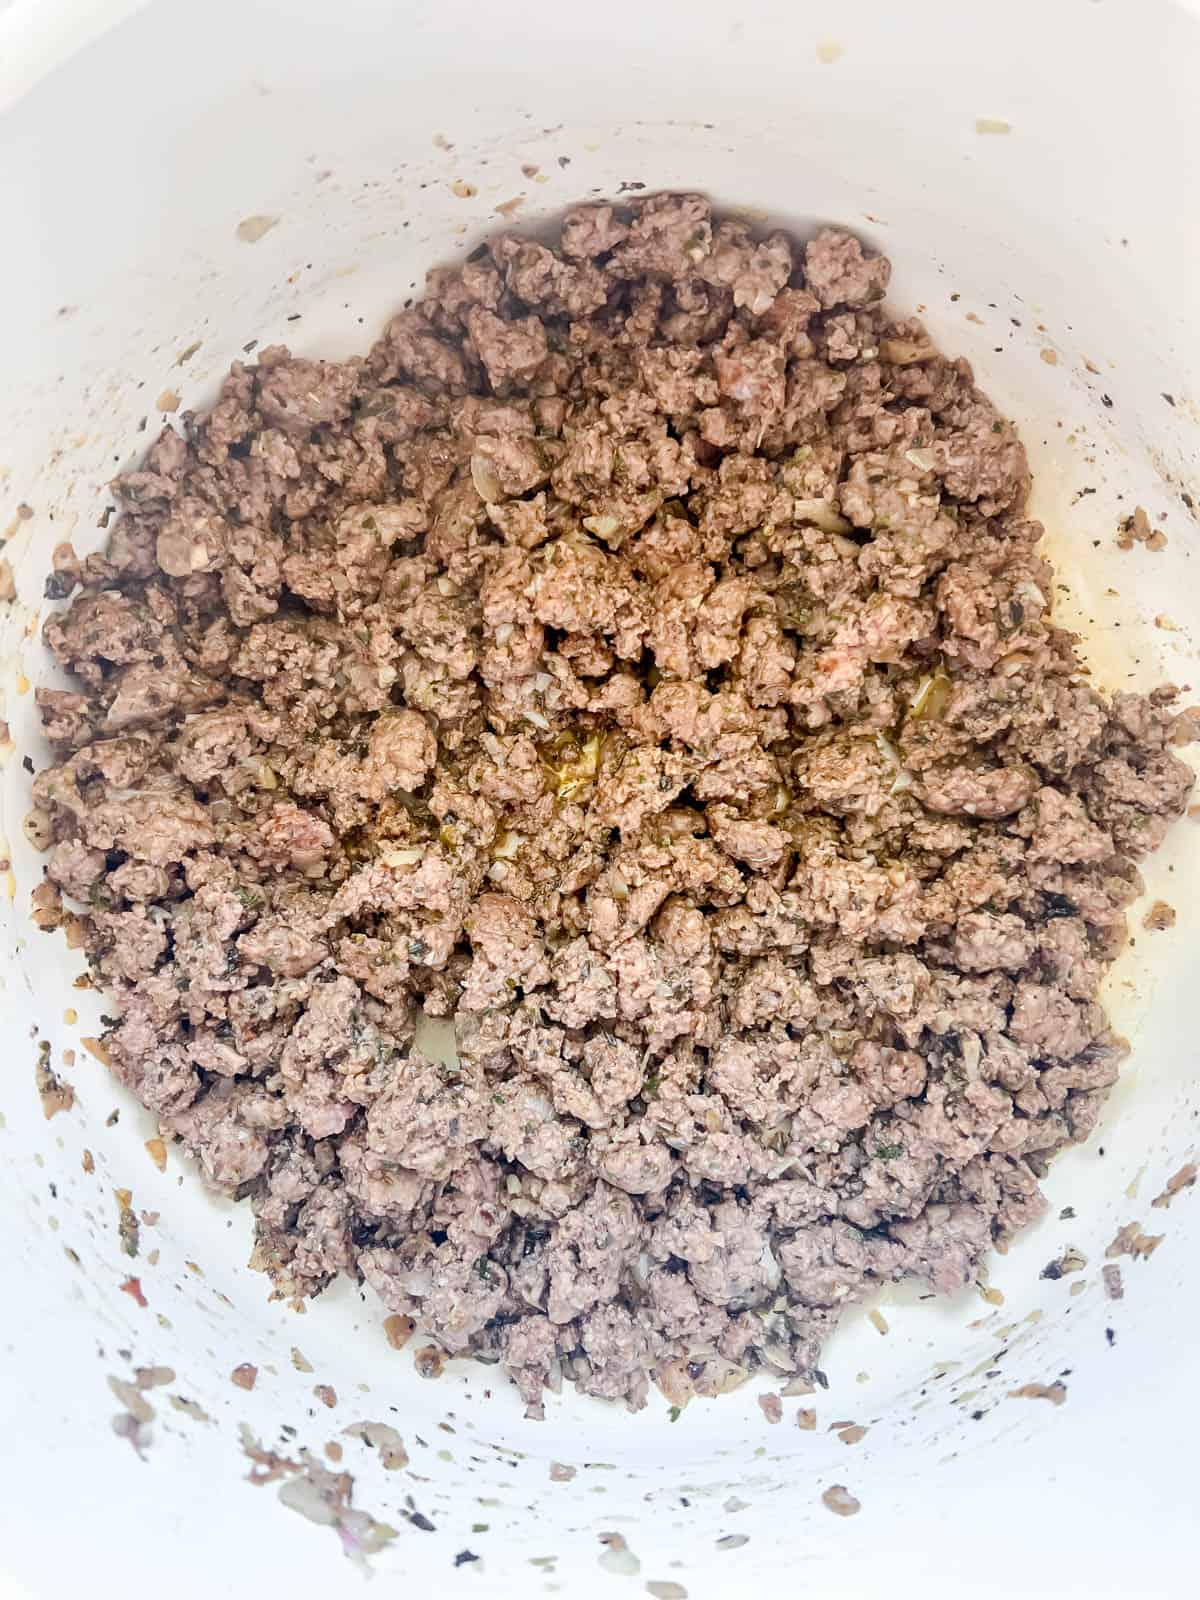 Ground beef being browned in a pan.